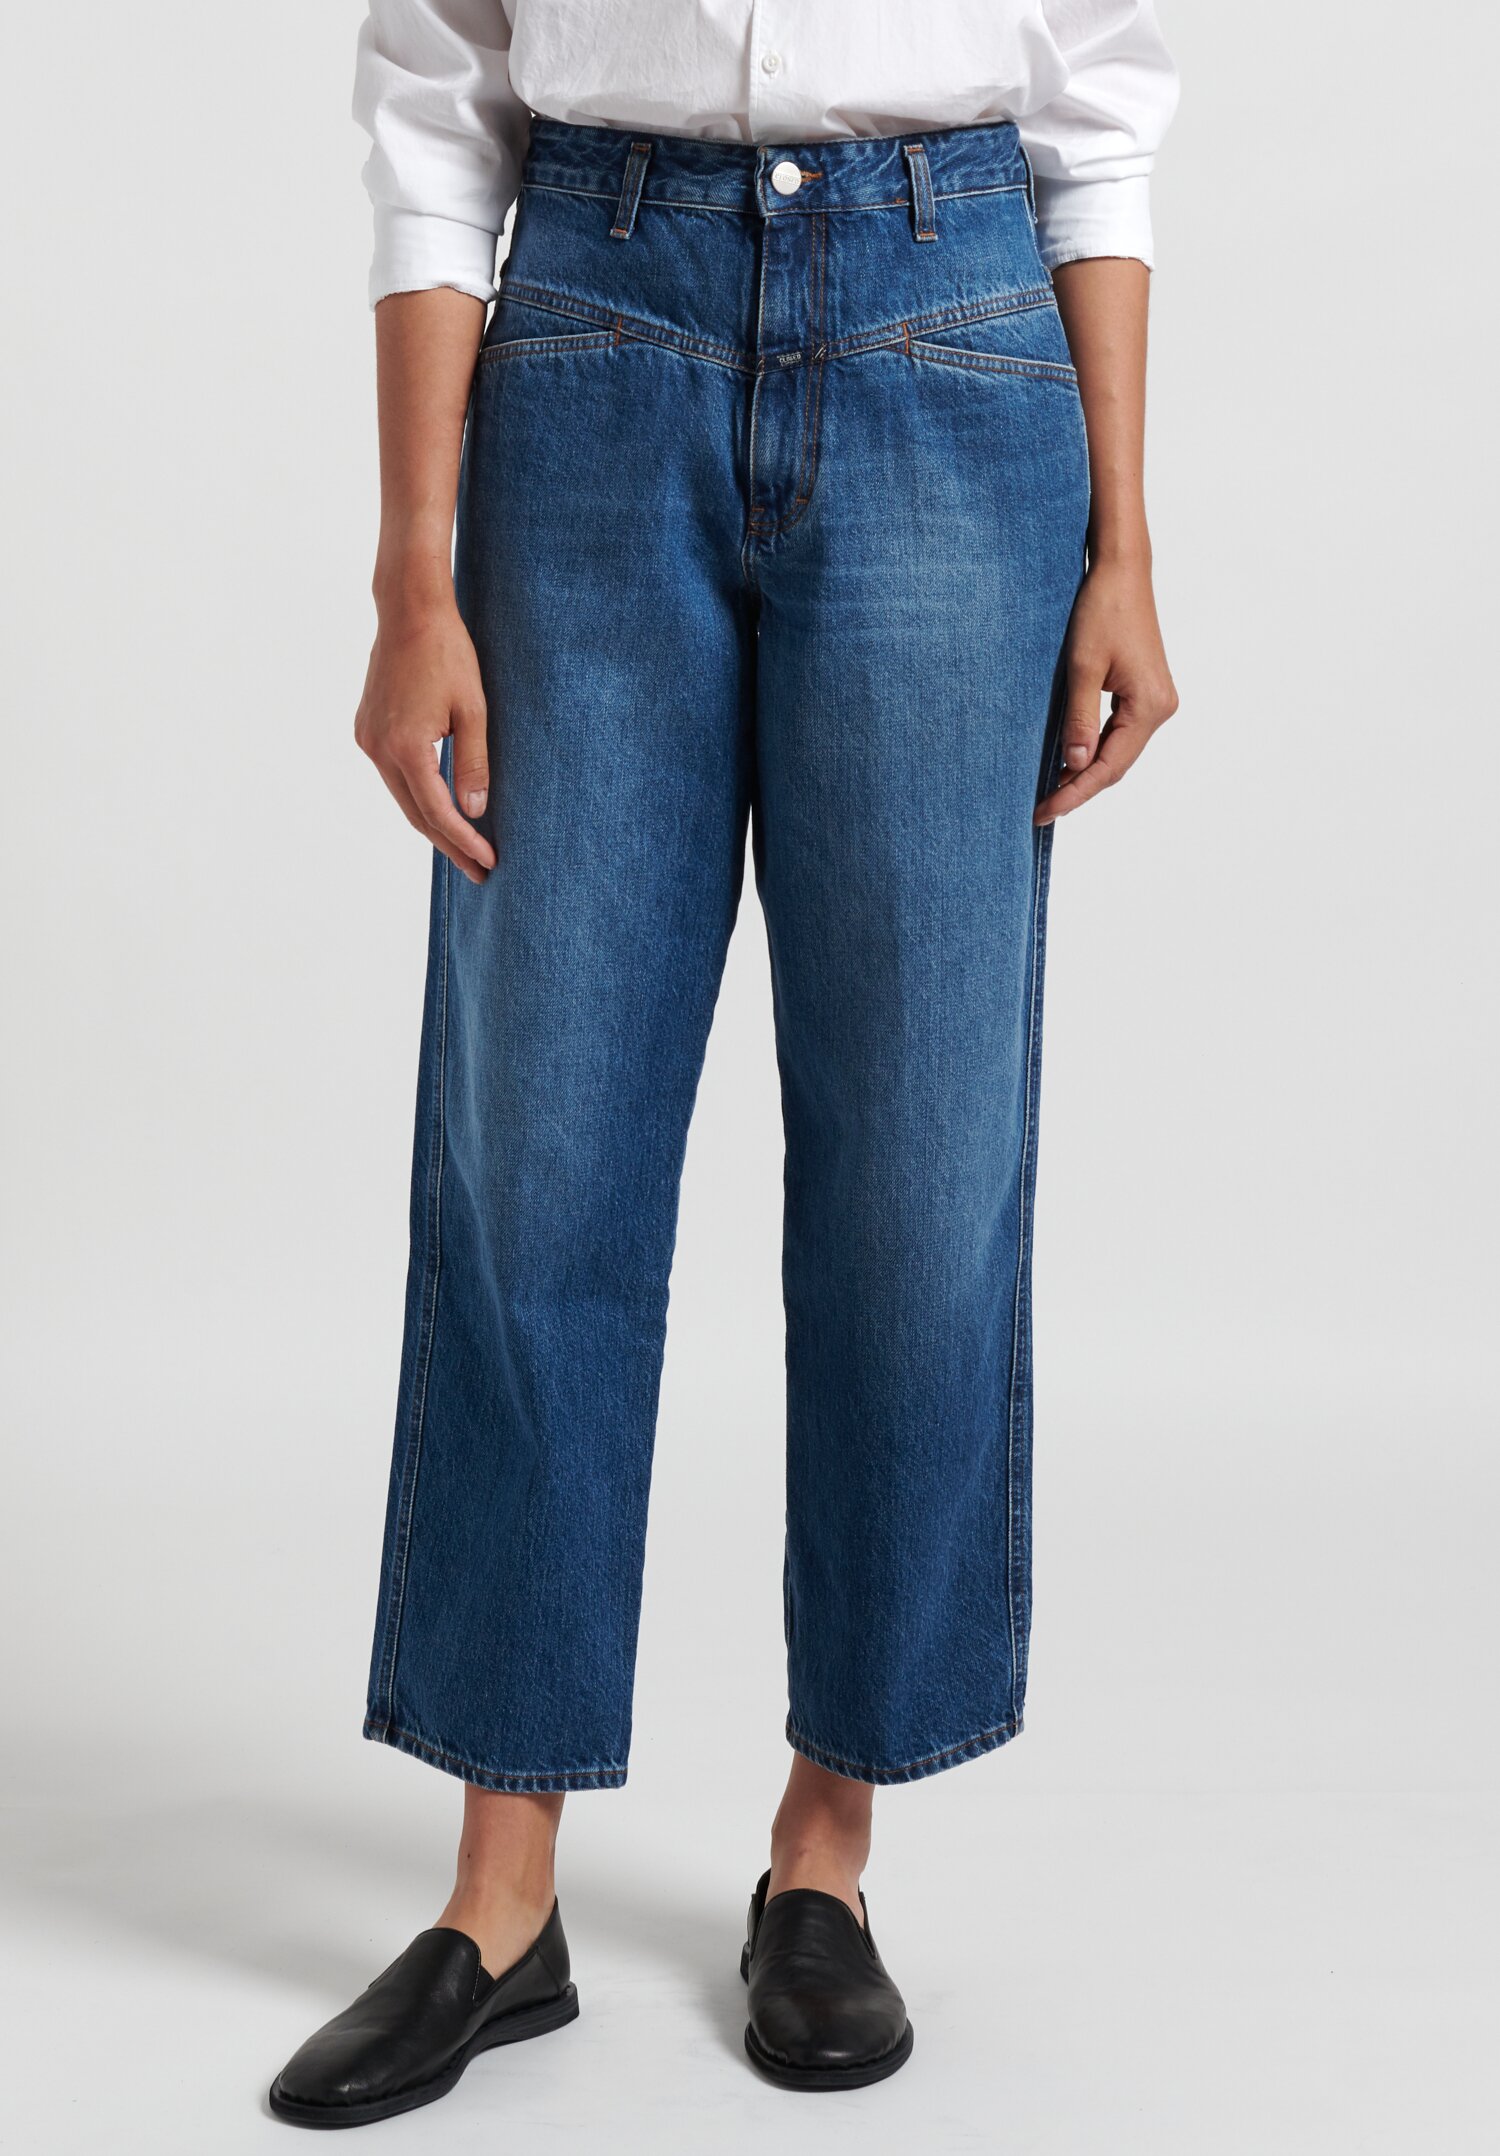 Closed Worker '85 High-Rise Jeans in Mid-Blue | Santa Fe Dry Goods ...